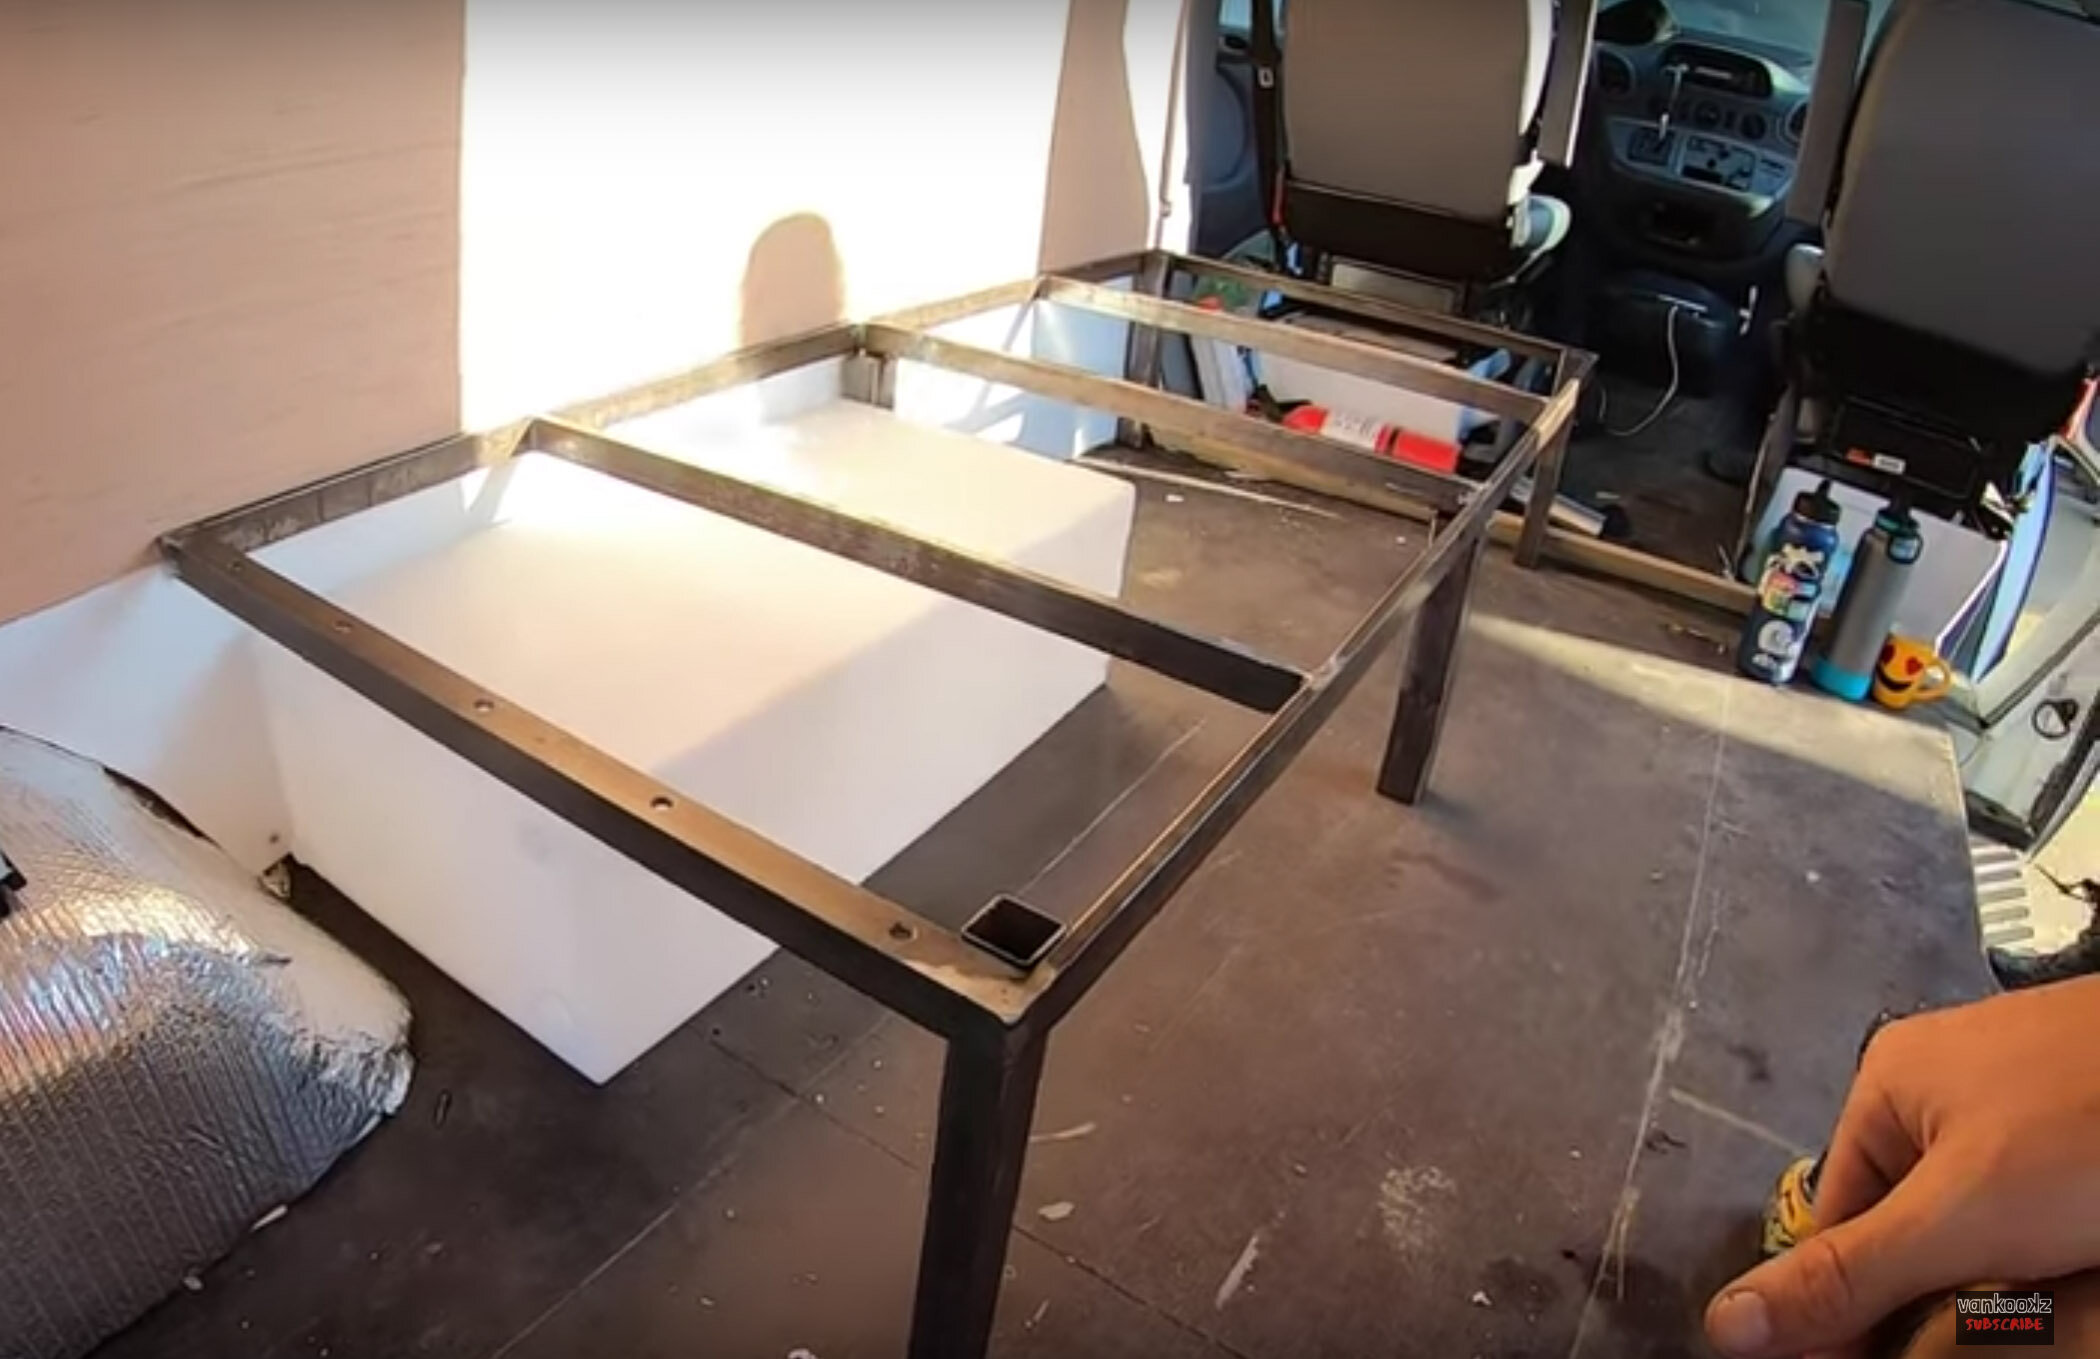 Building a folding bed in a conversion van -.jpg